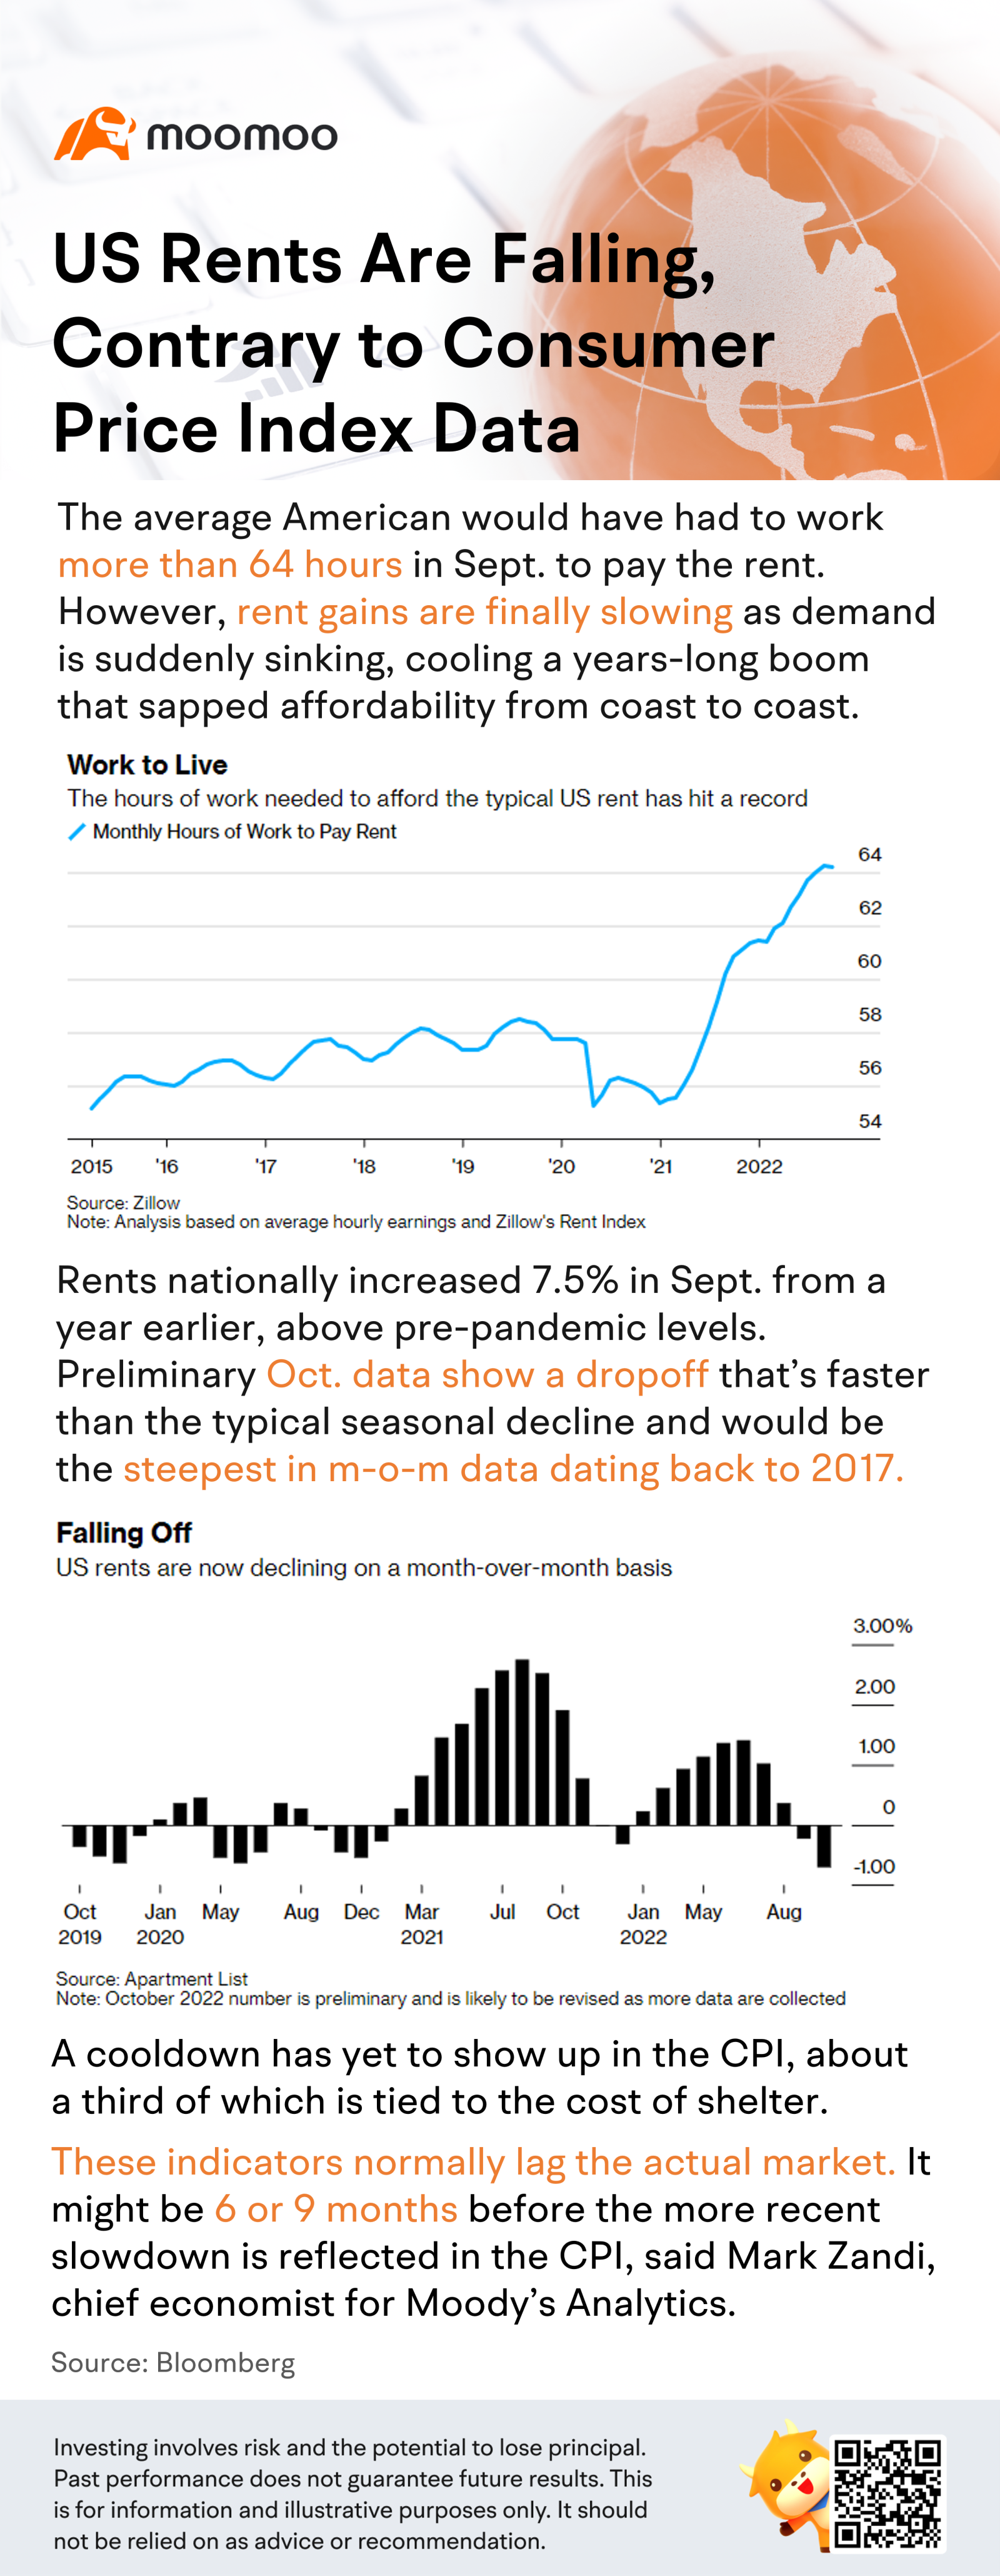 US rents finally start falling, contrary to CPI data